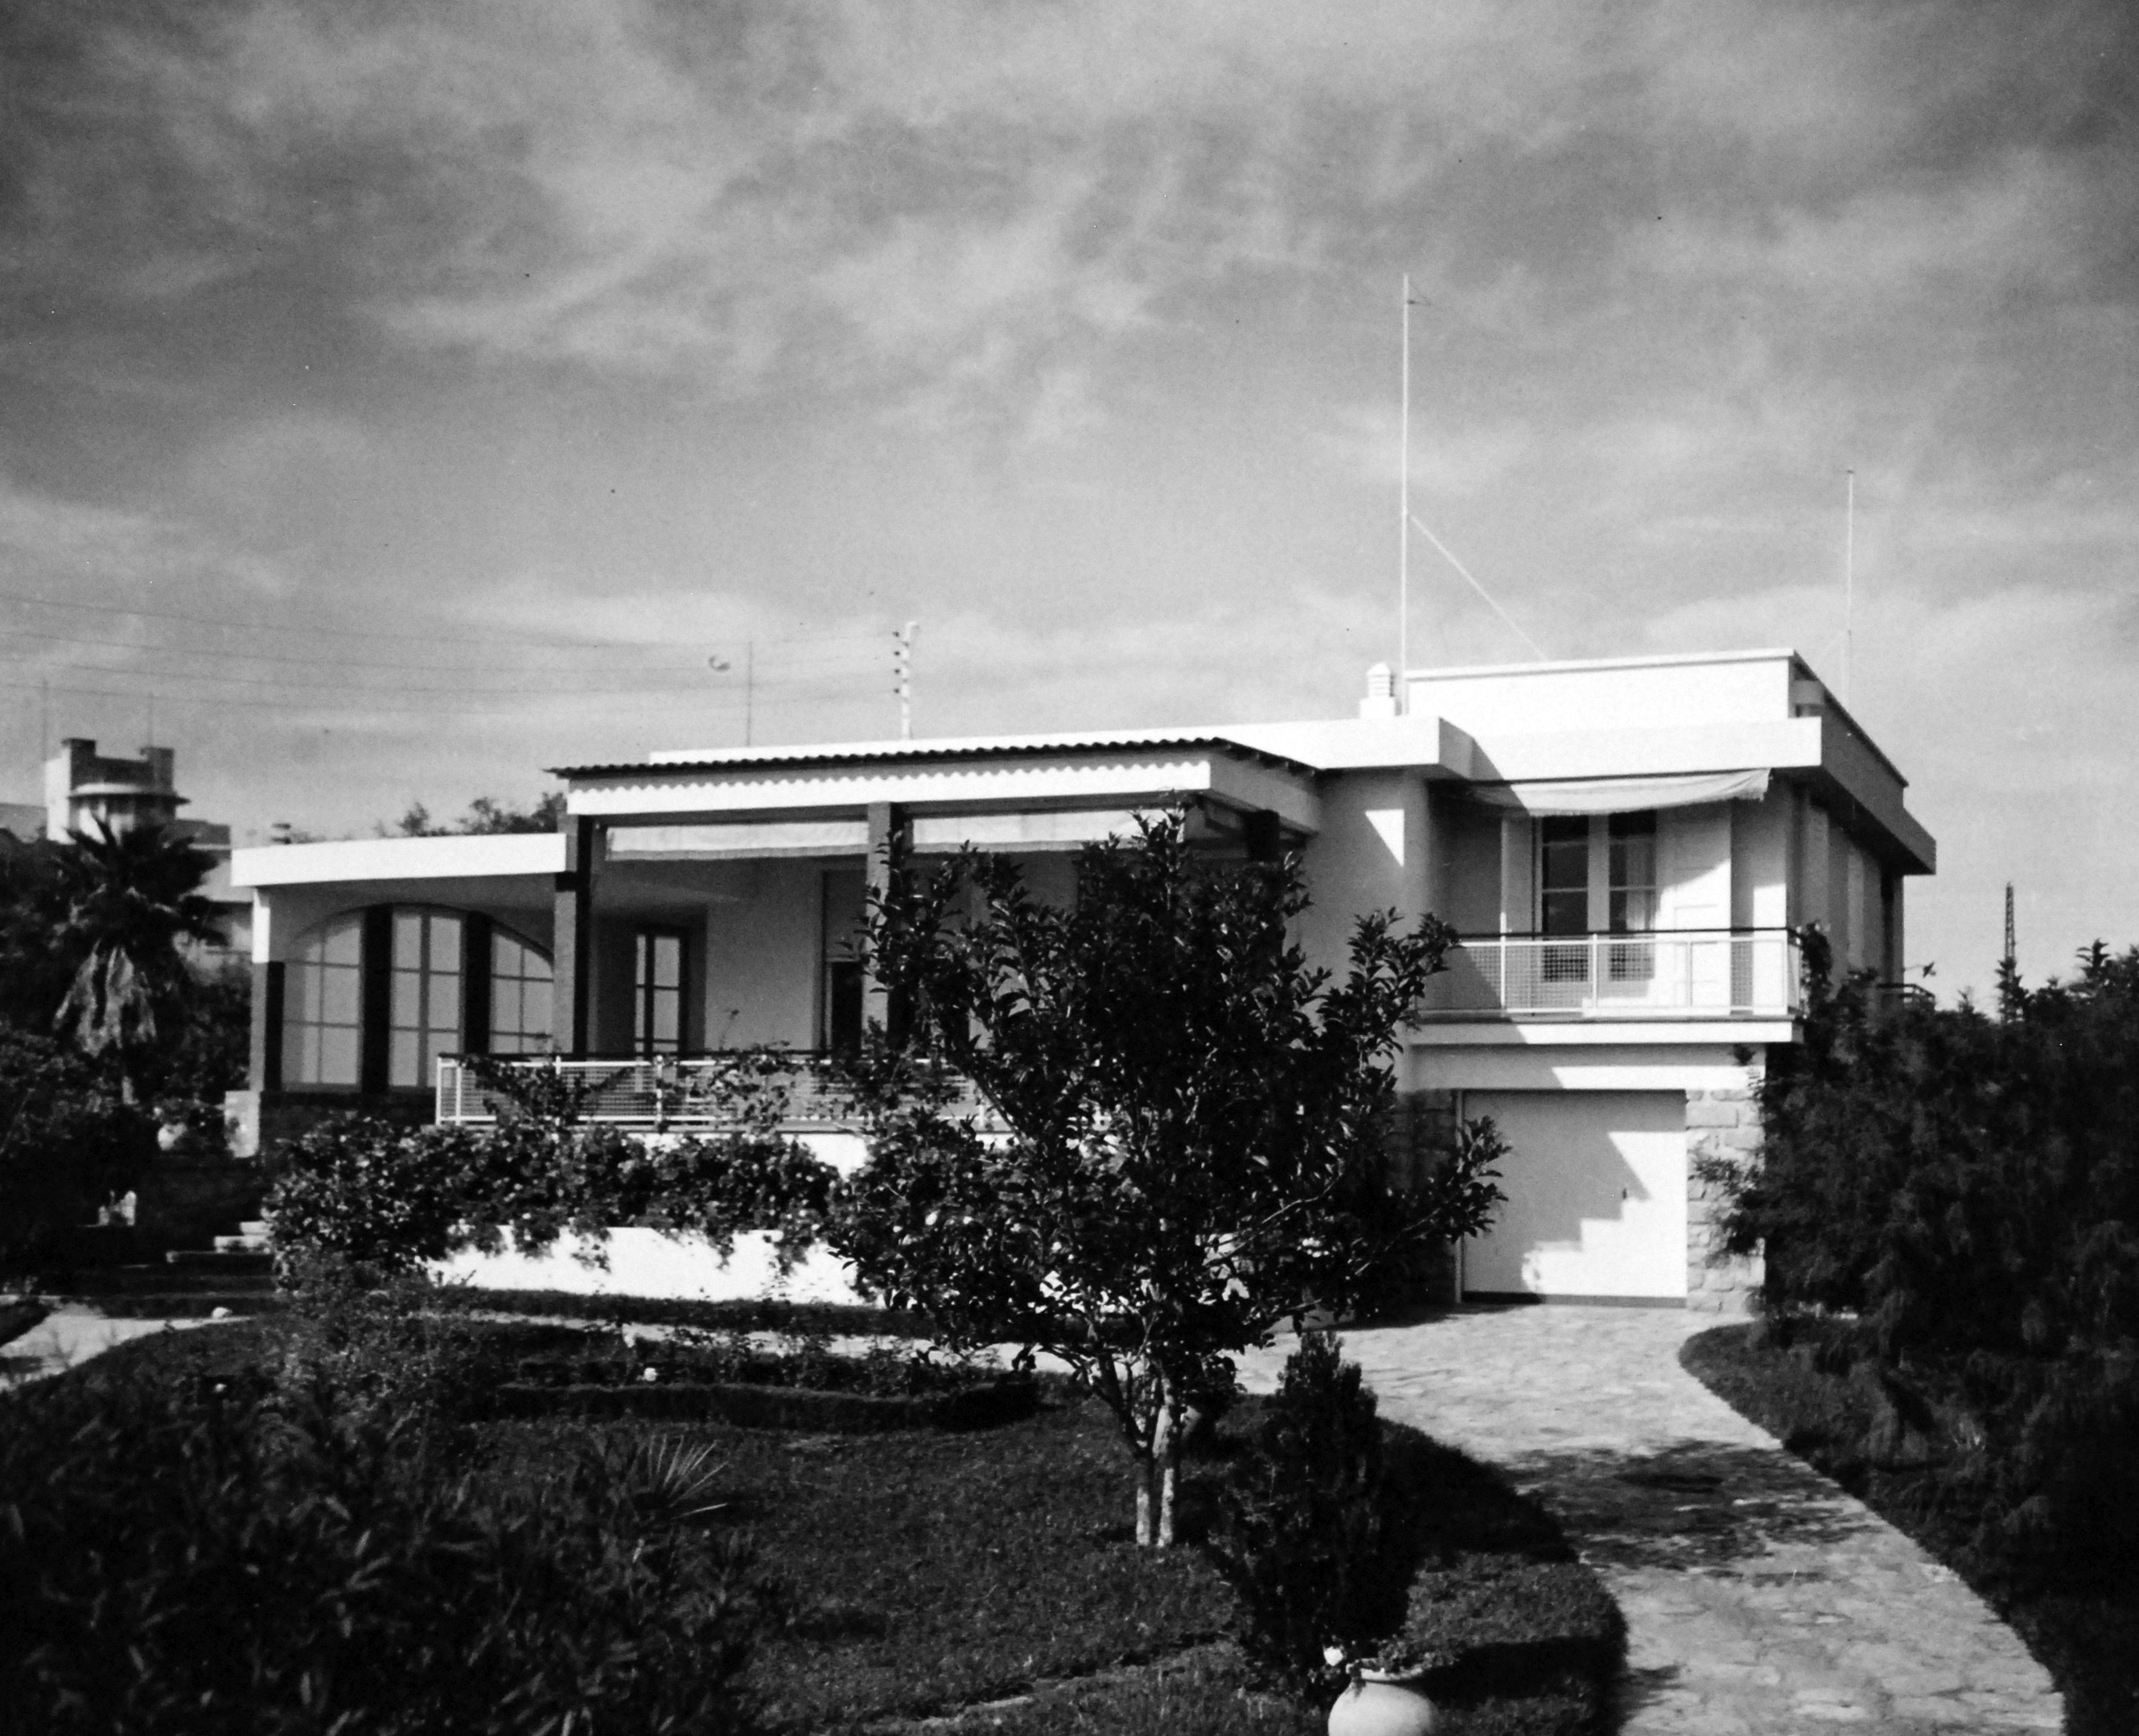 The Anfa House in Casablanca, Morocco, Jan 1943. This house was part of Camp Anfa on the grounds of the Anfa Hotel. Anfa House was Franklin Roosevelt’s residence during the Casablanca Conference.